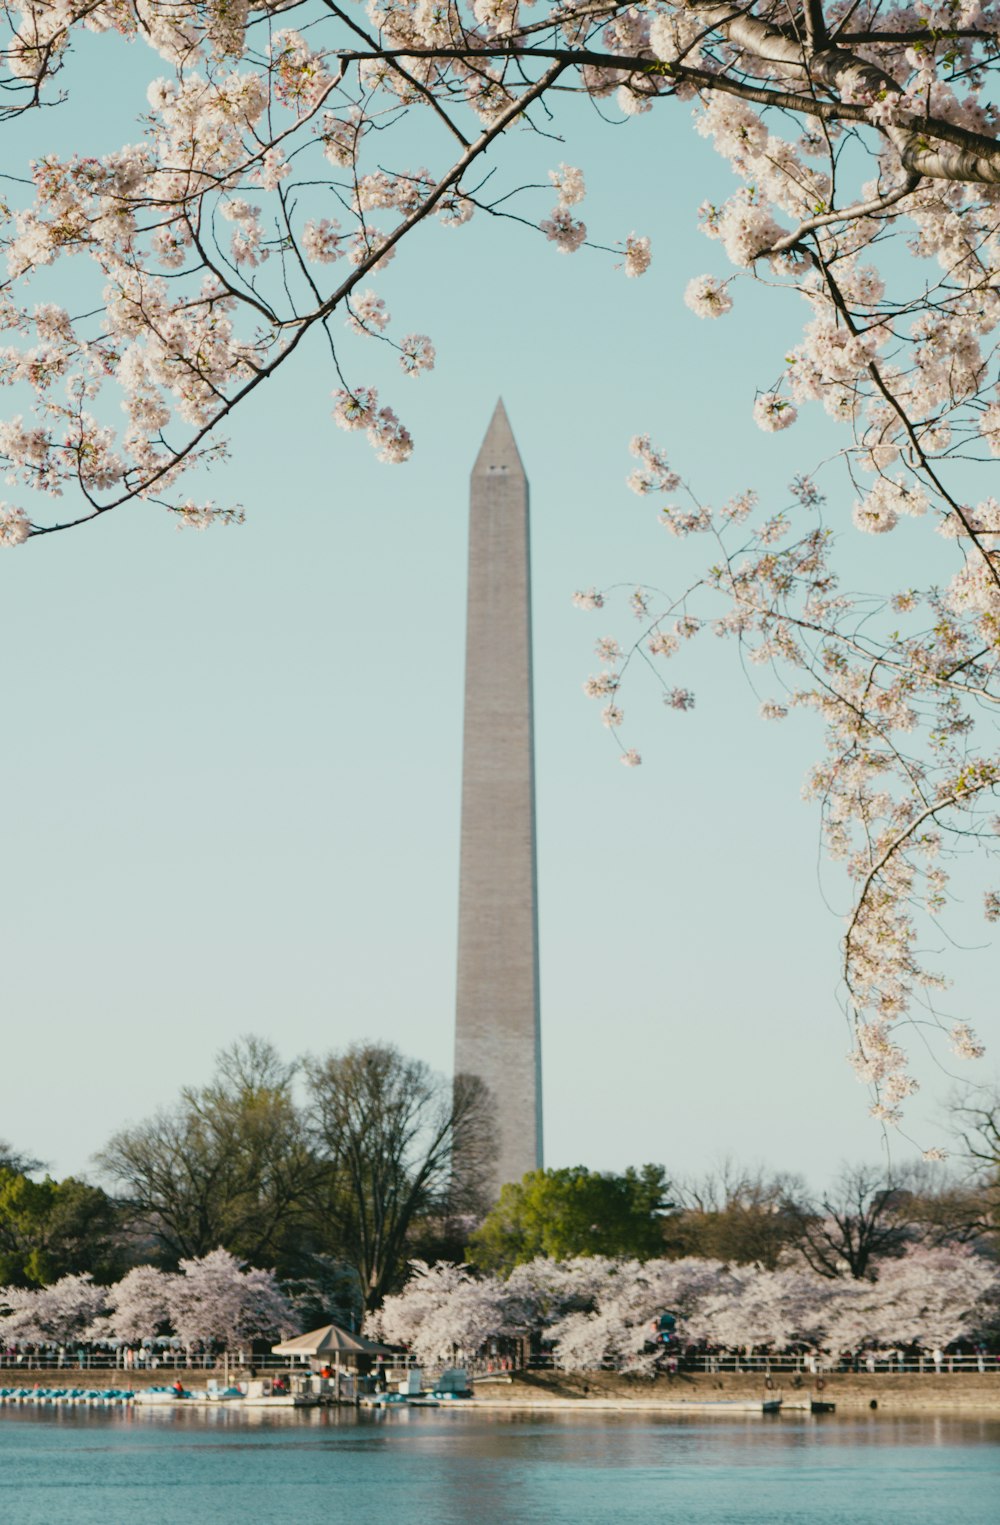 the washington monument is surrounded by cherry blossoms